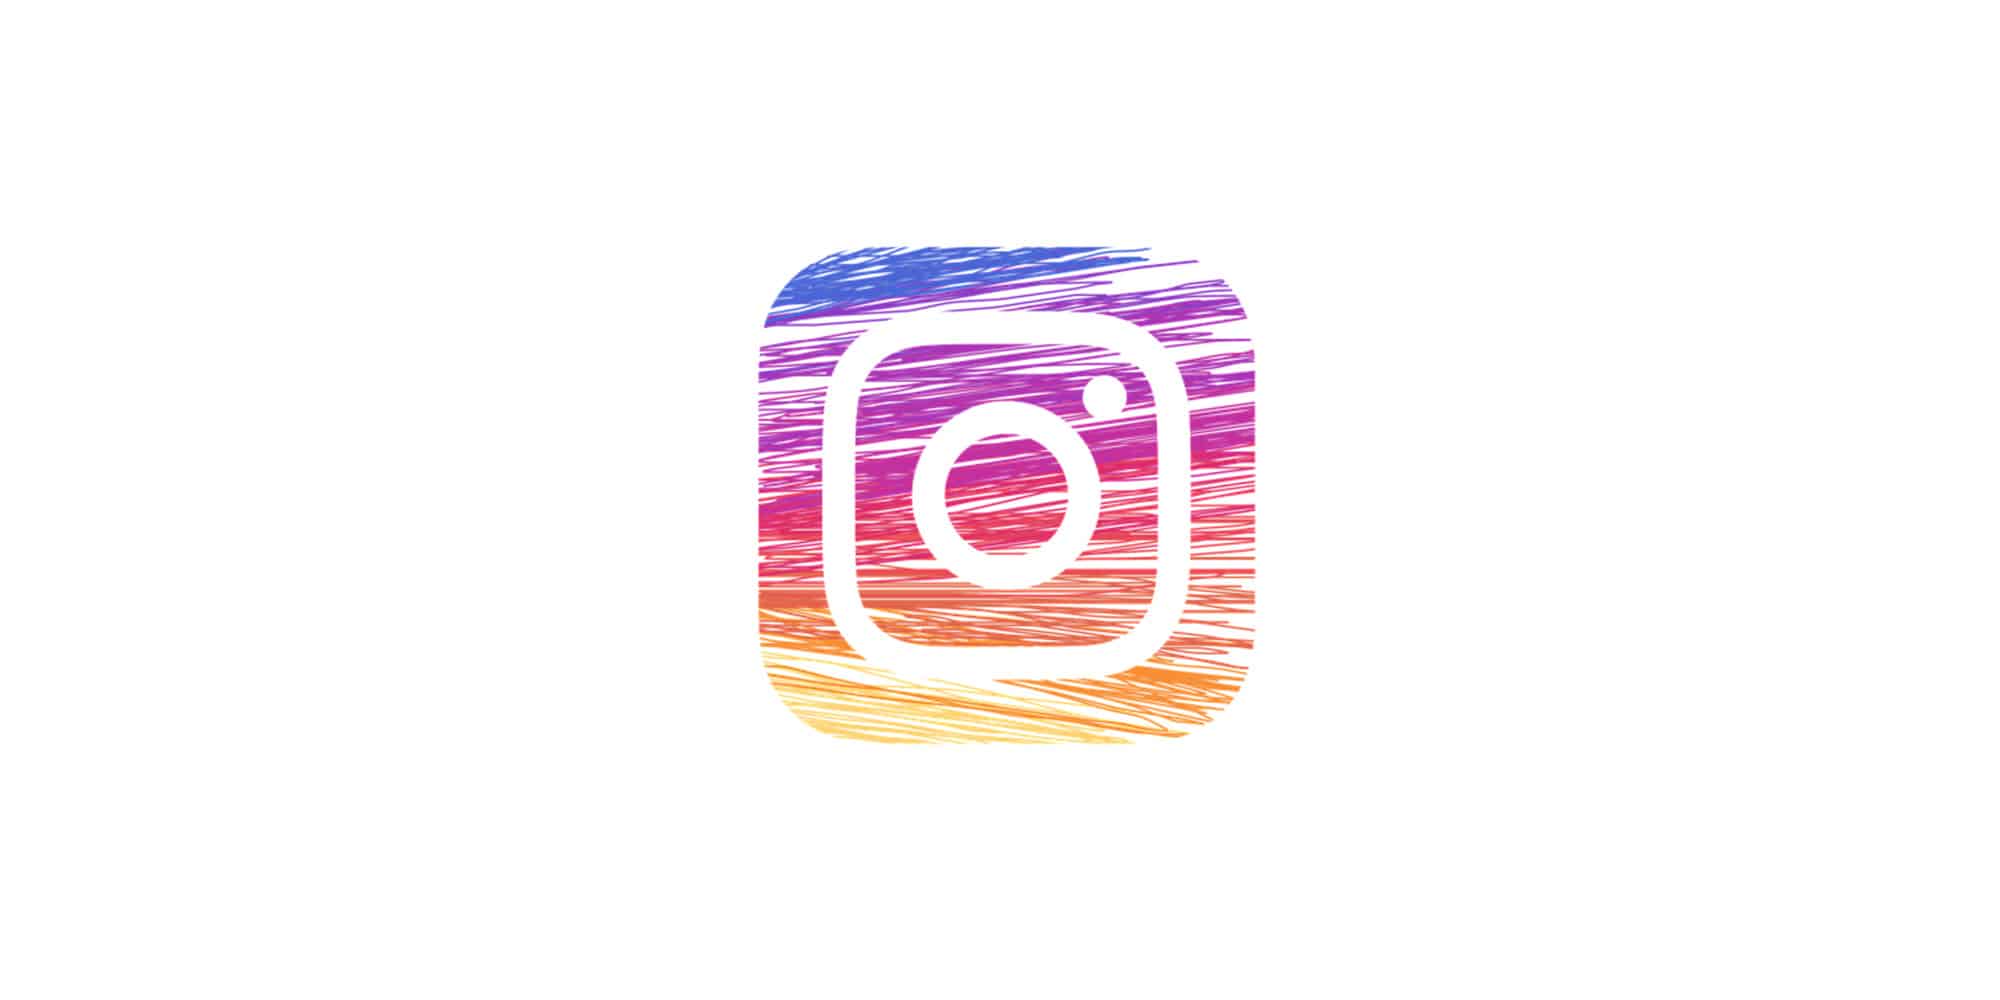 Instagram’s “Account linking” beneficial for users